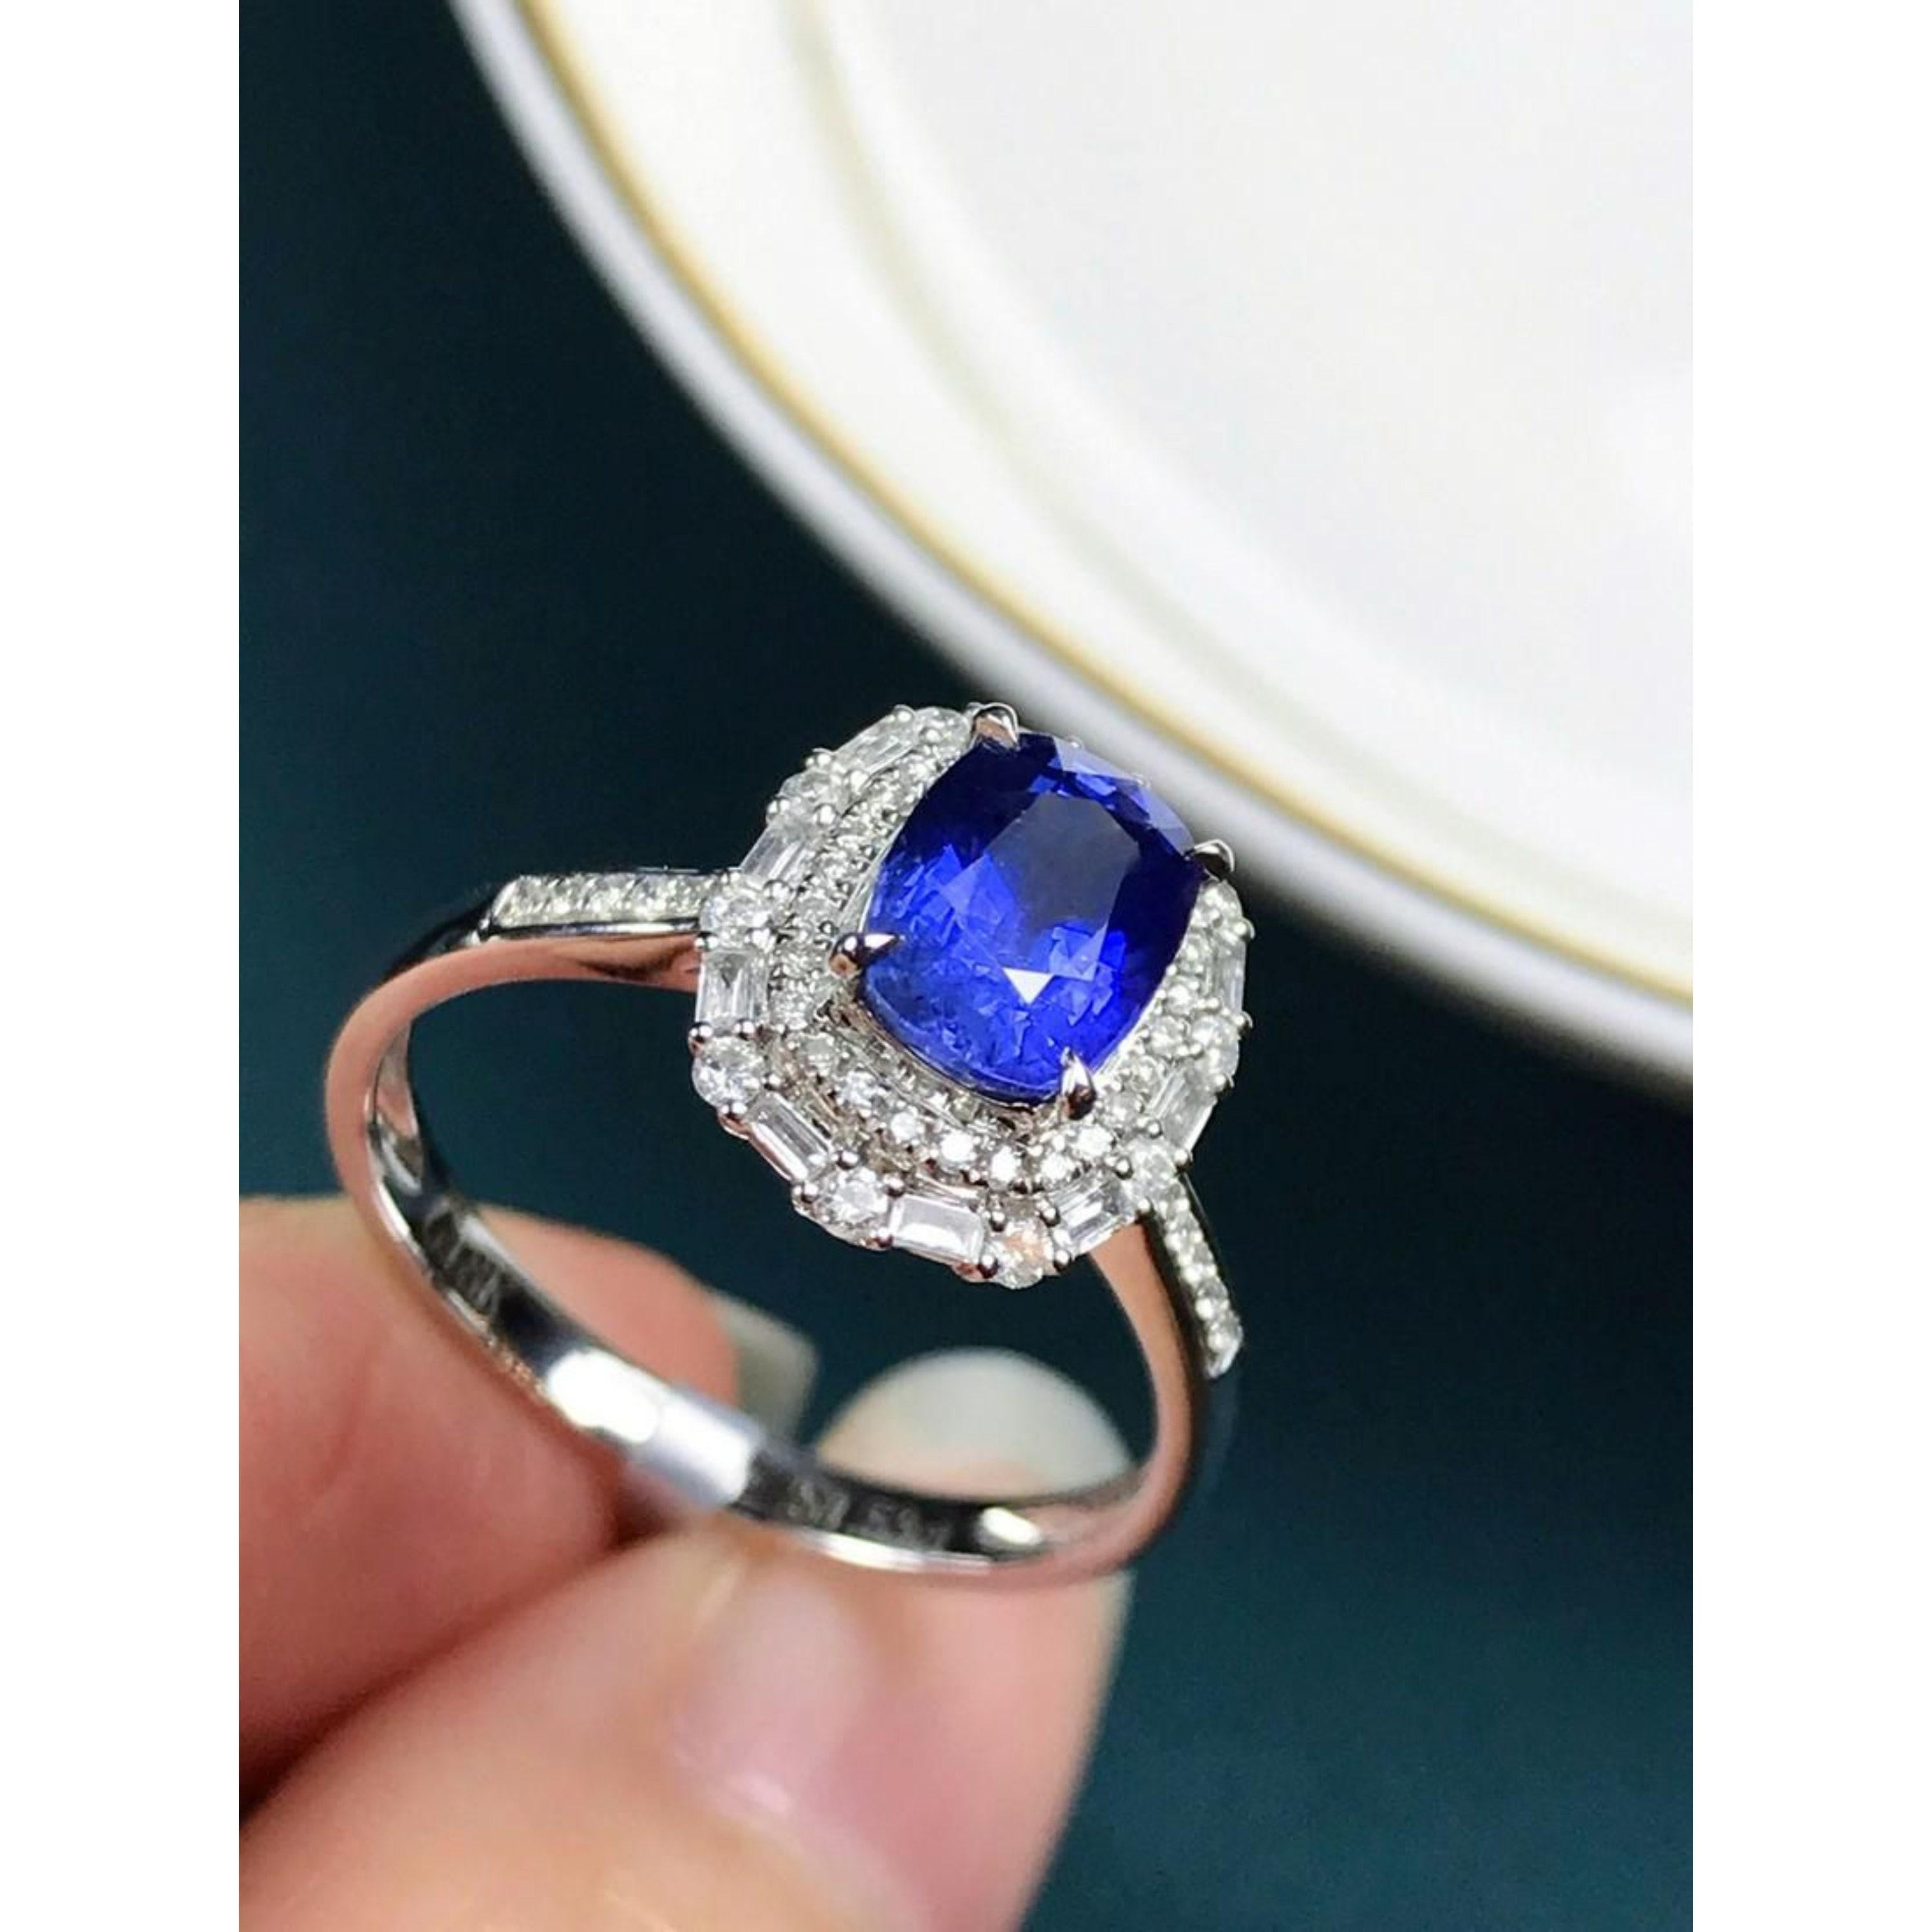 For Sale:  Natural Cushion Cut Sapphire Engagement Ring, Diamond Wedding Ring 7